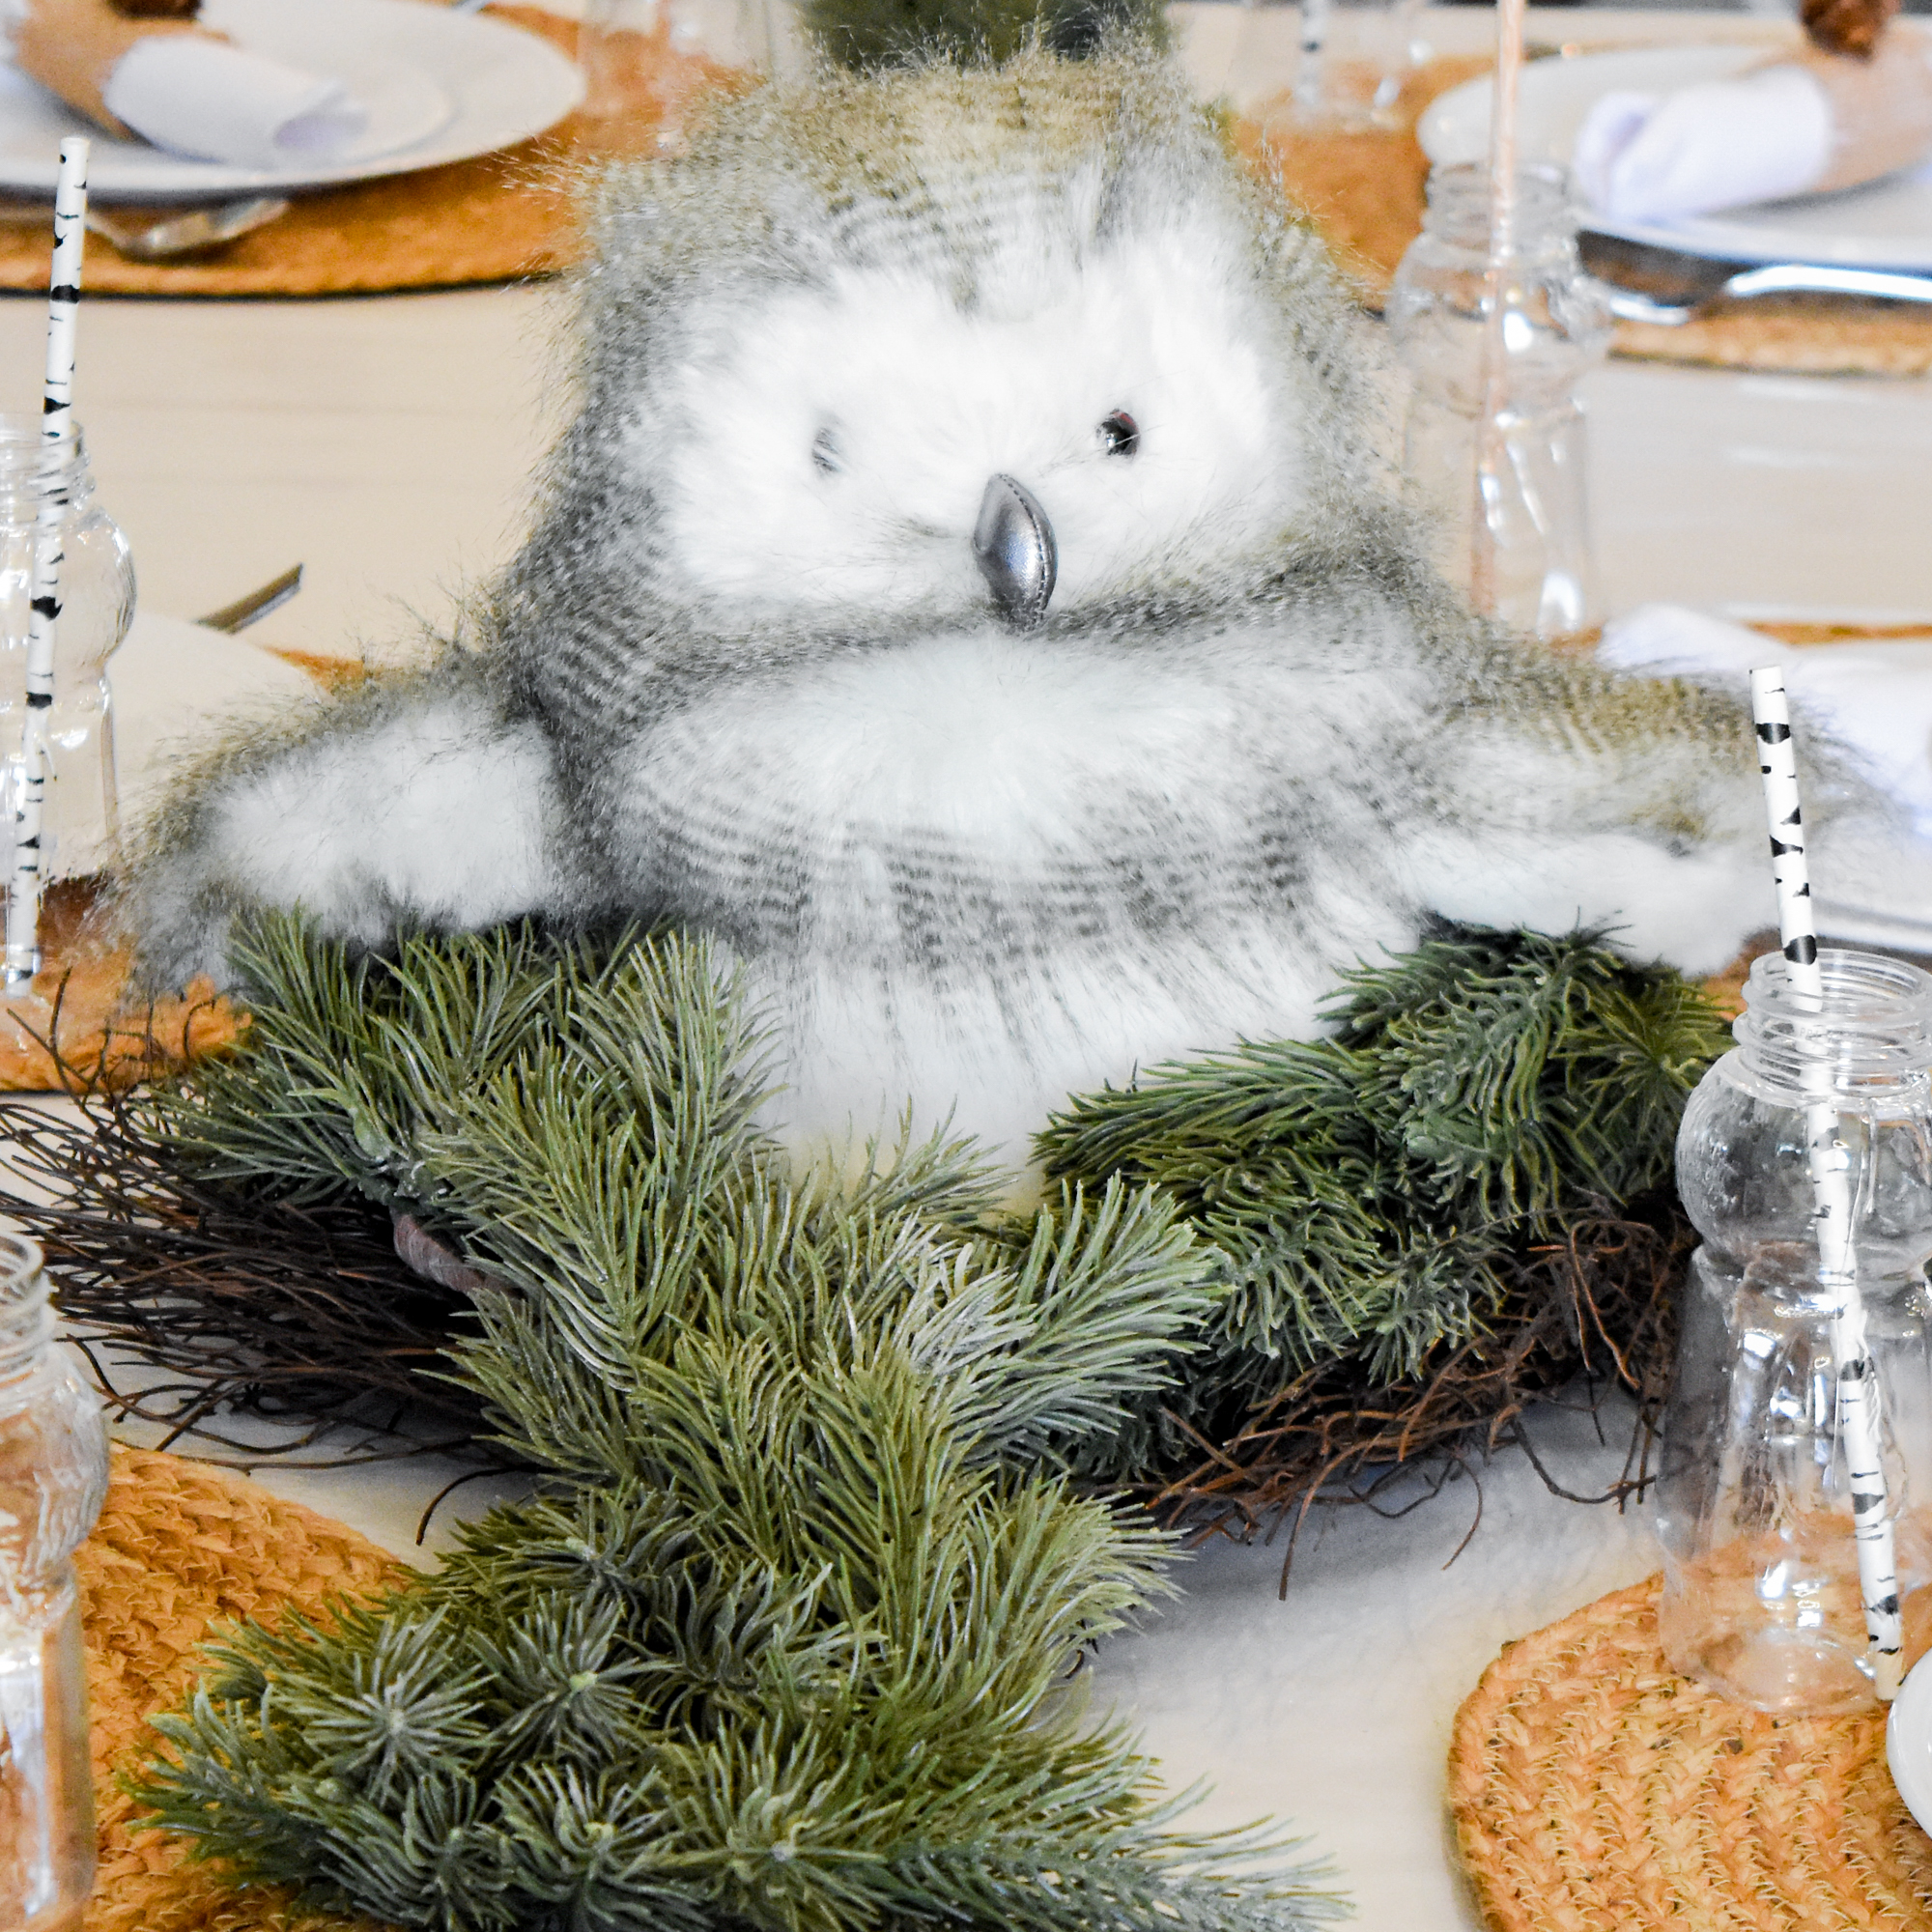 Adults Woodland Party Tablescape